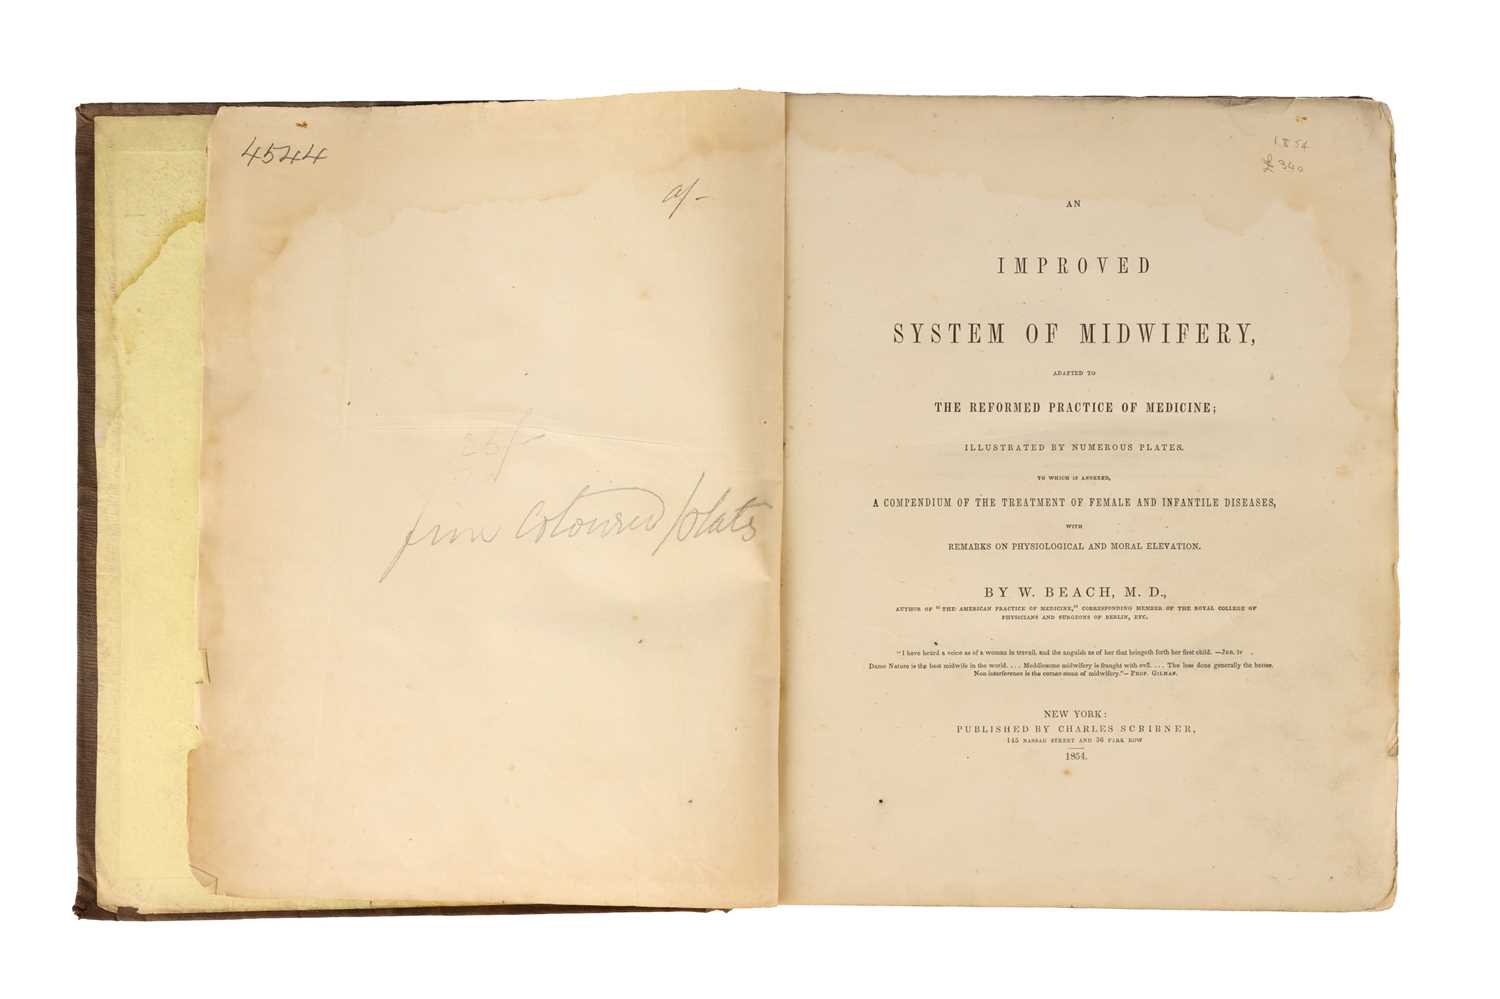 Lot 374 - Medicine - An Improved System of Midwifery, Adapted to the Reformed Practice of Medicine